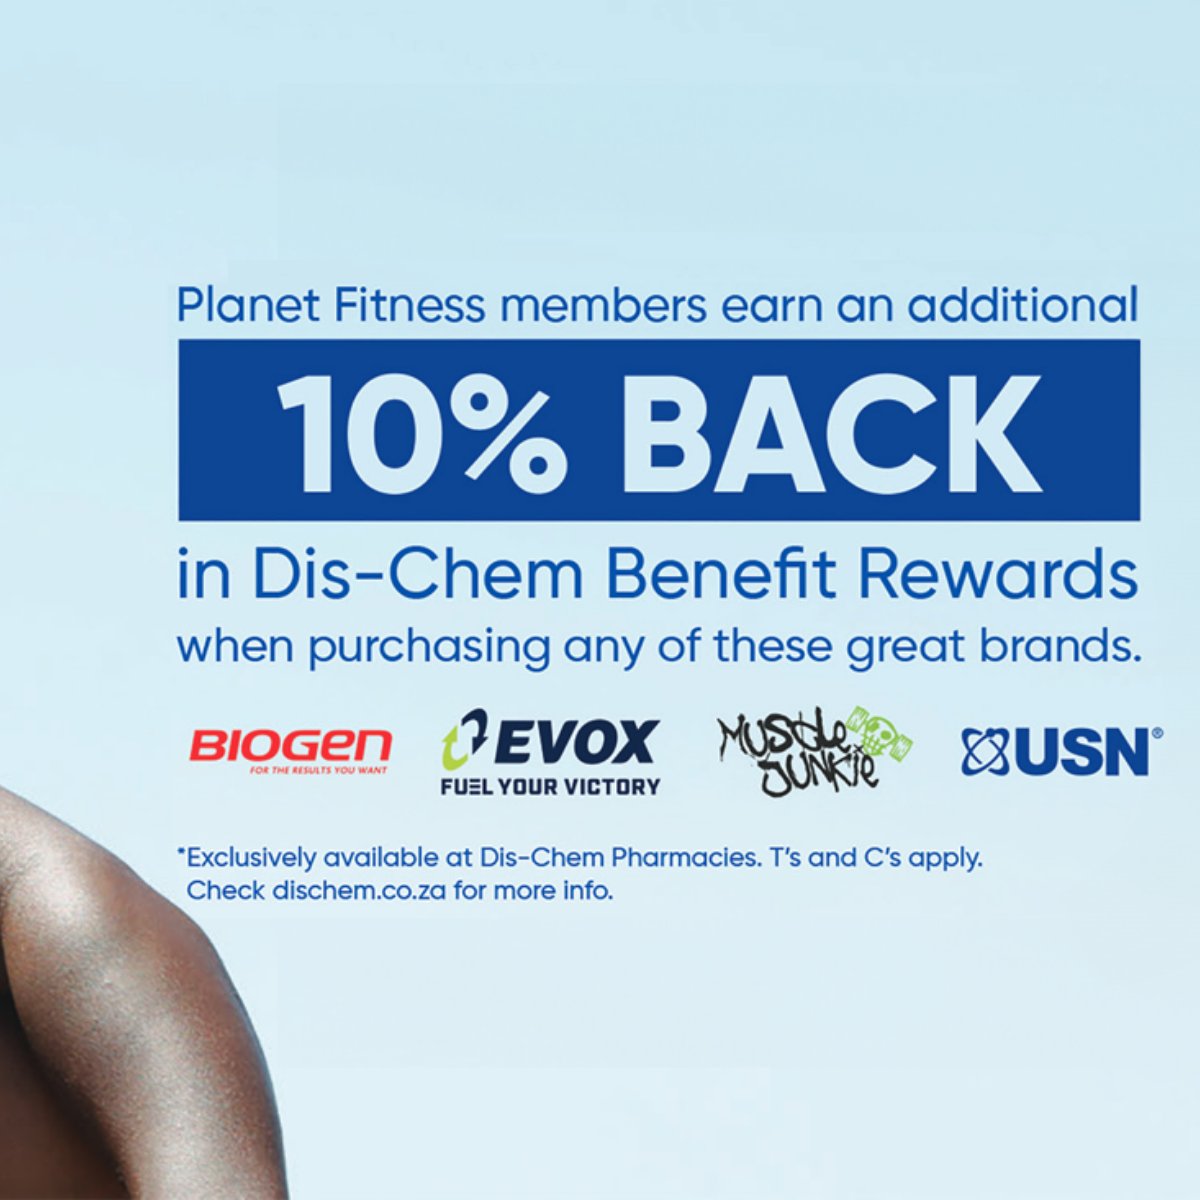 More than just gym gains, points gains. Planet Fitness members get an additional 10% back when buying Biogen, Evox, Muscle Junkie and USN. Learn more: bit.ly/3TAxcjB #PlanetFitness #Train #Gym #Save